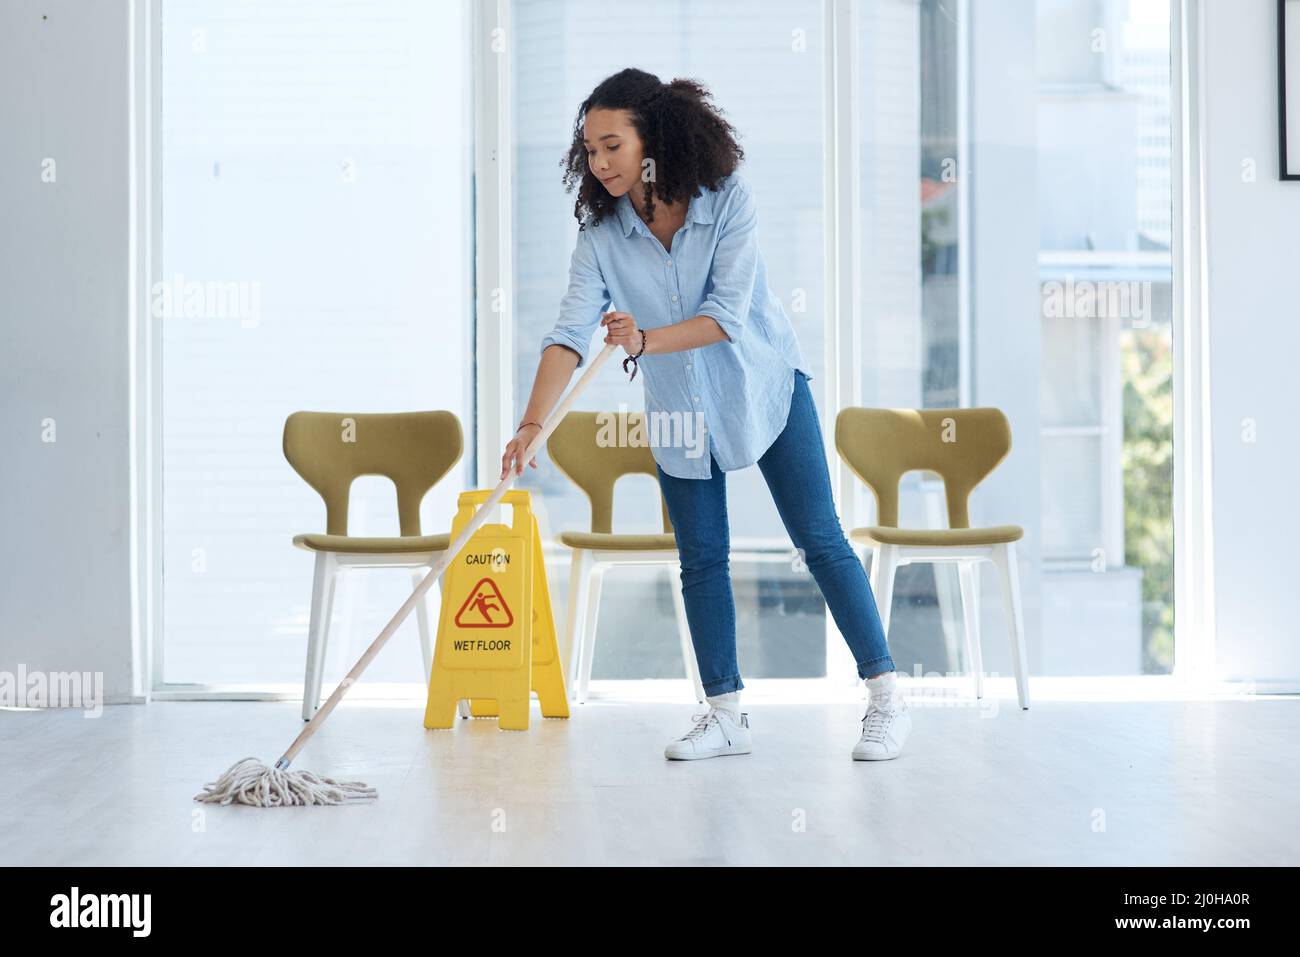 Nothing like seeing your floors sparkle. Shot of a young woman mopping her floor at home. Stock Photo